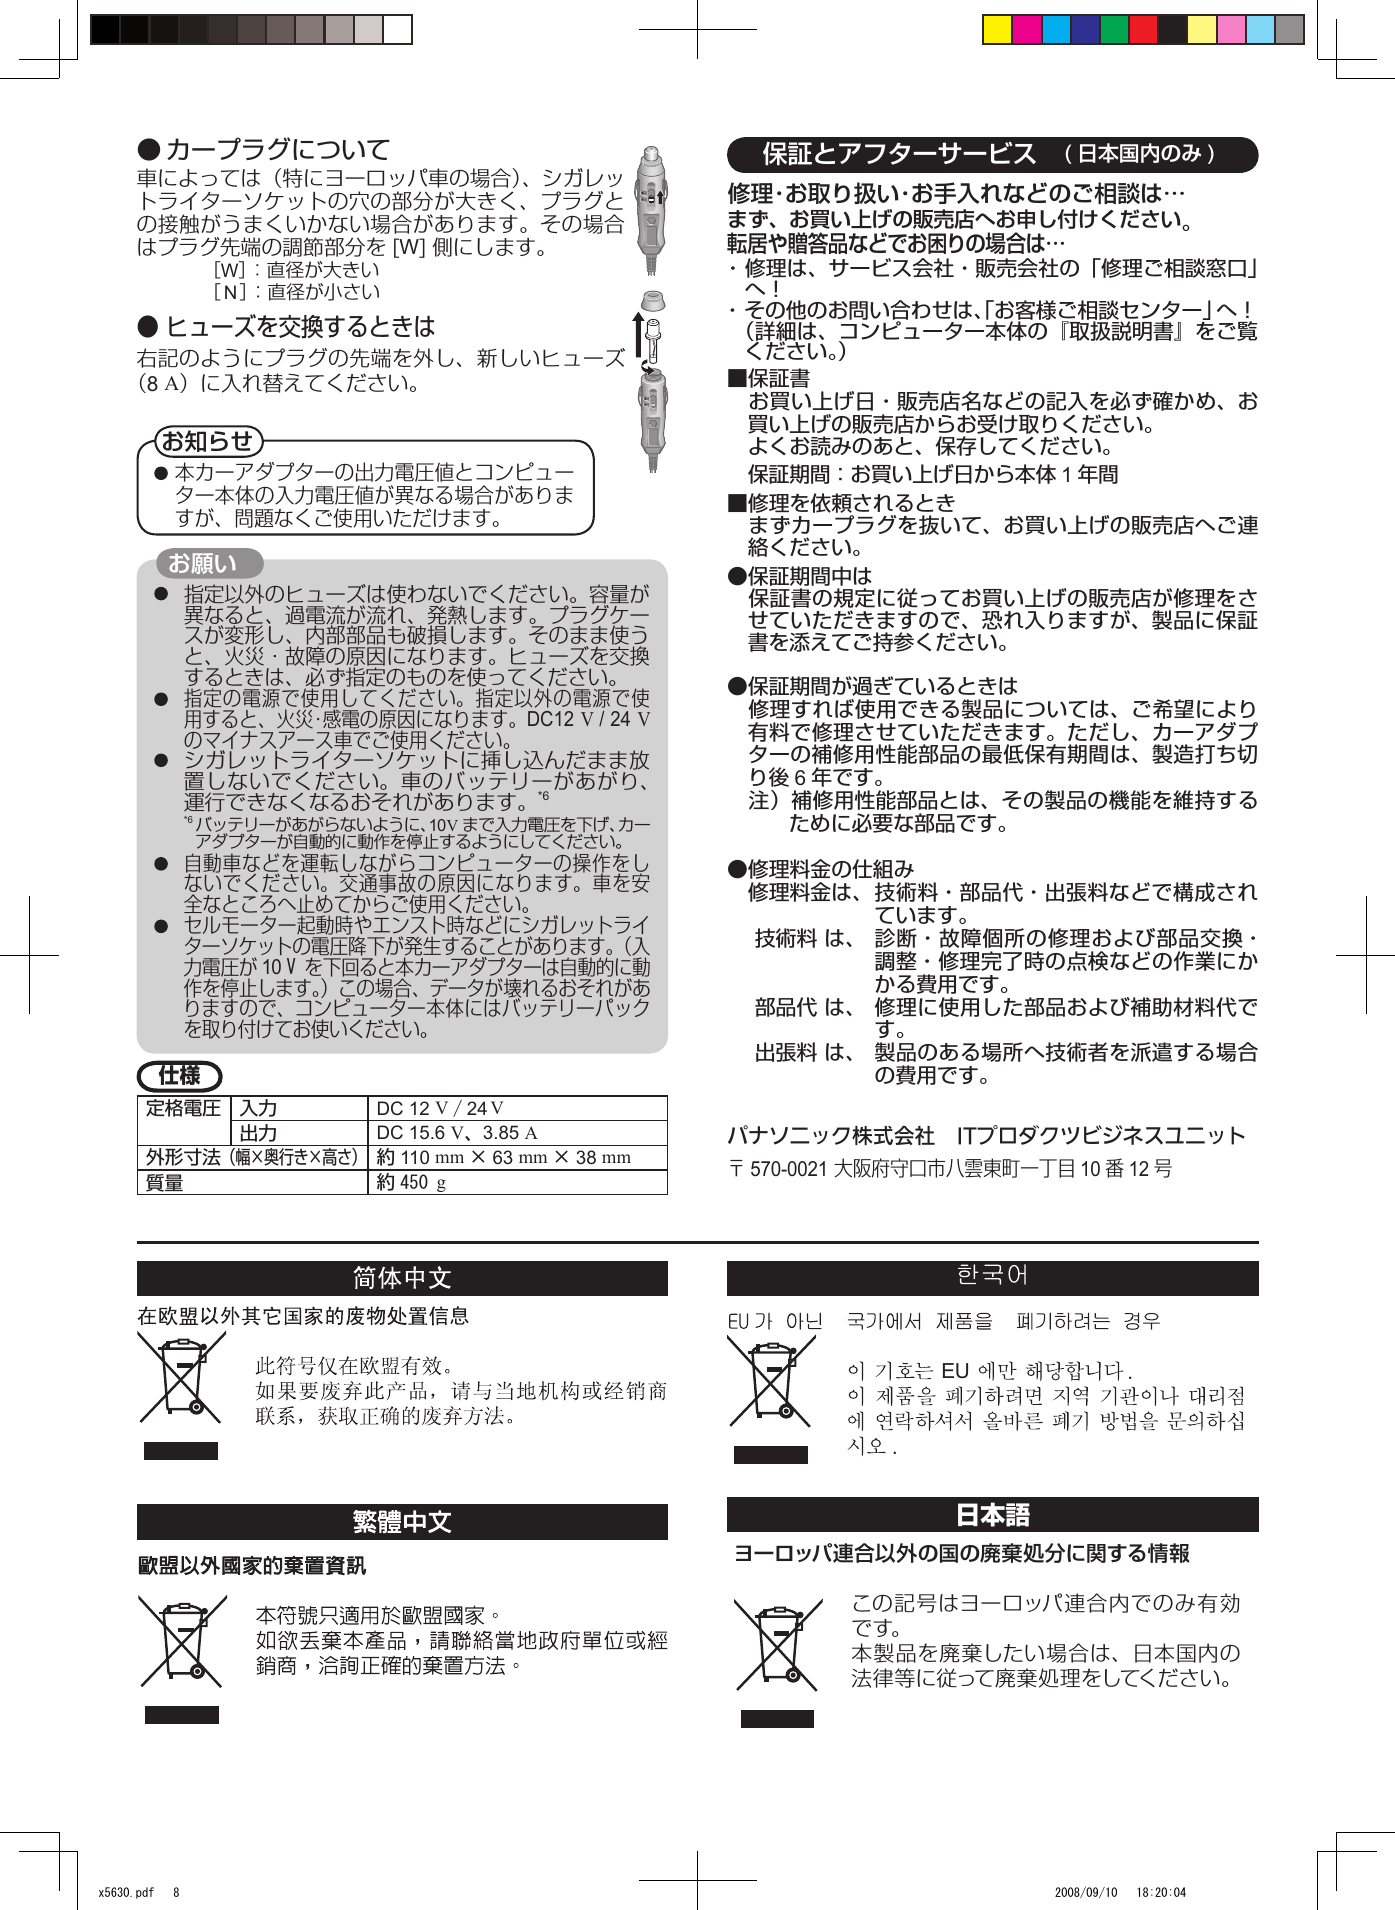 Page 8 of 8 - Panasonic CF-AAxxxx (AC Adapter) 使用手册 : Operating Instructions (English/ German/ French/ Chinese[S]/ Chinese[T]/ Korean/ Japanese) (Revision) Aav1601aw-oi-dfqx5630wa-non-nonlogo-JMGFCSCTKO-p20110072